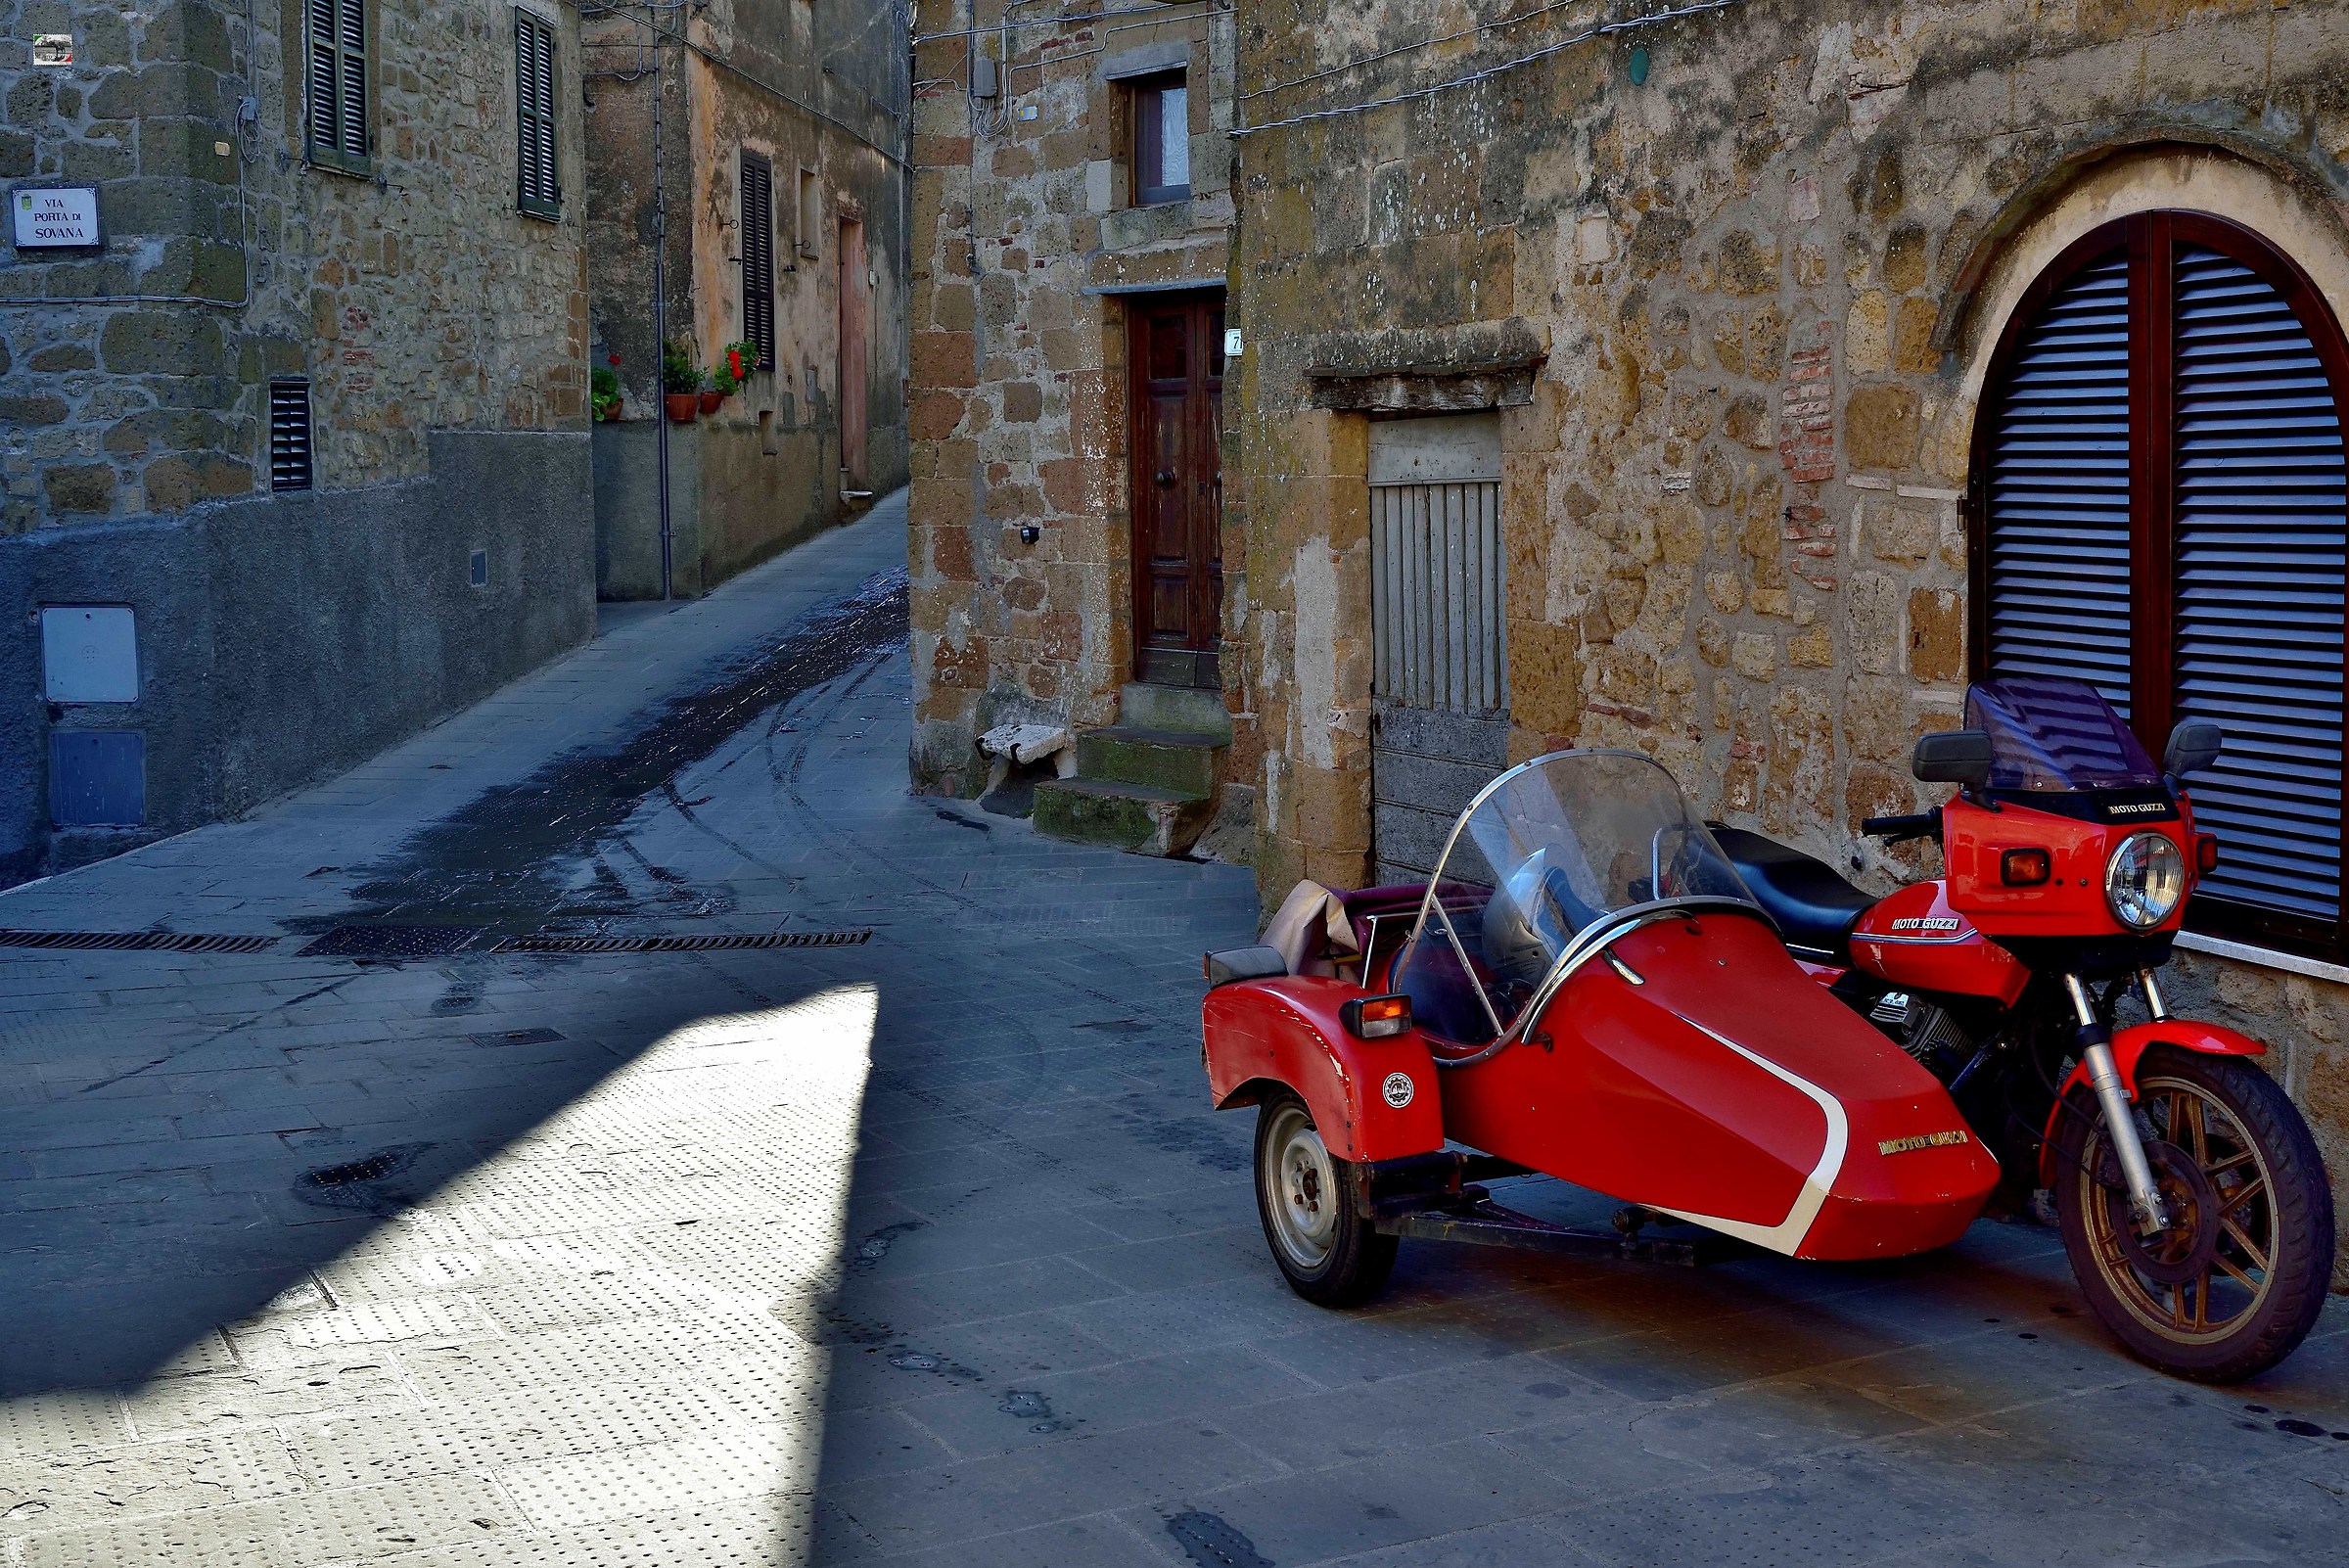 Sidecar in the village...